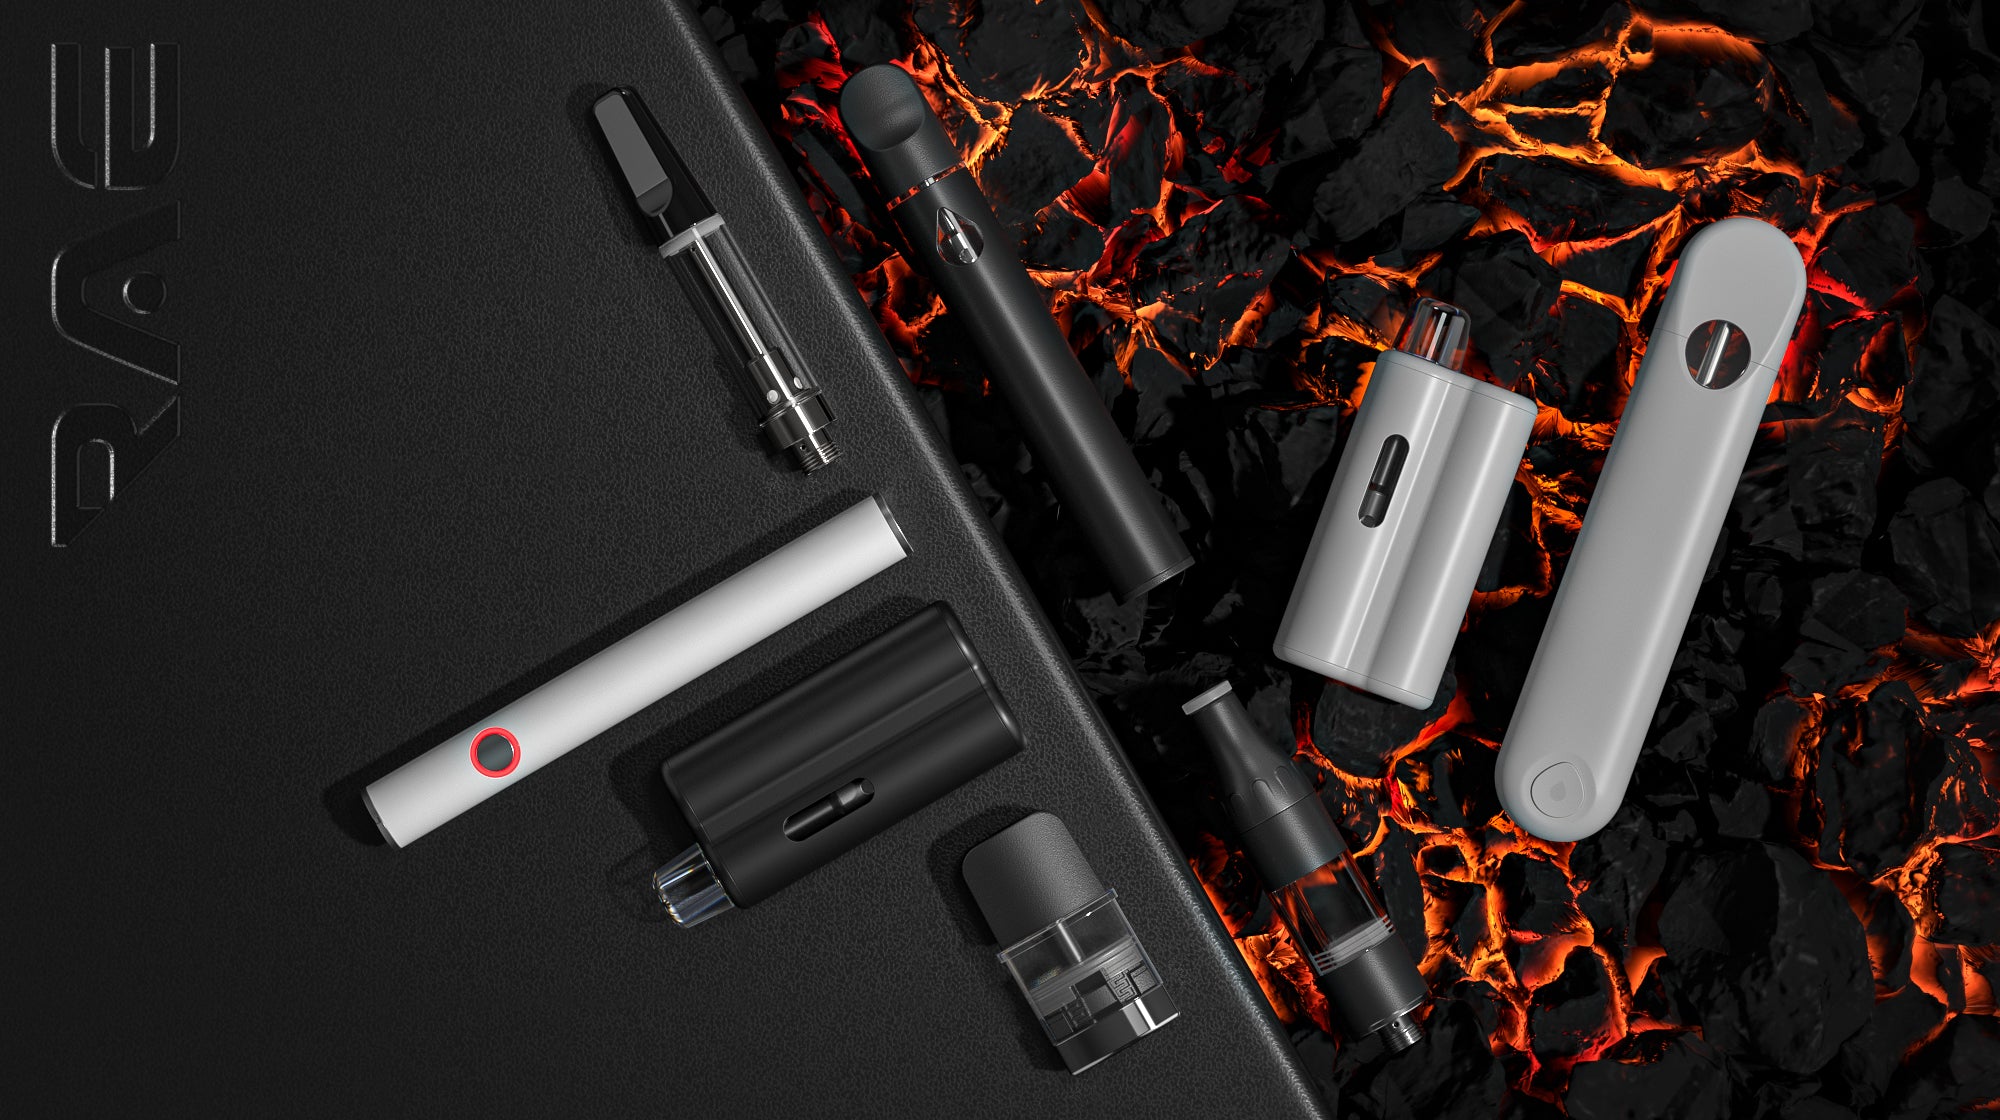 Variety of unbranded RAE brand vape hardware on black surface and hot coal